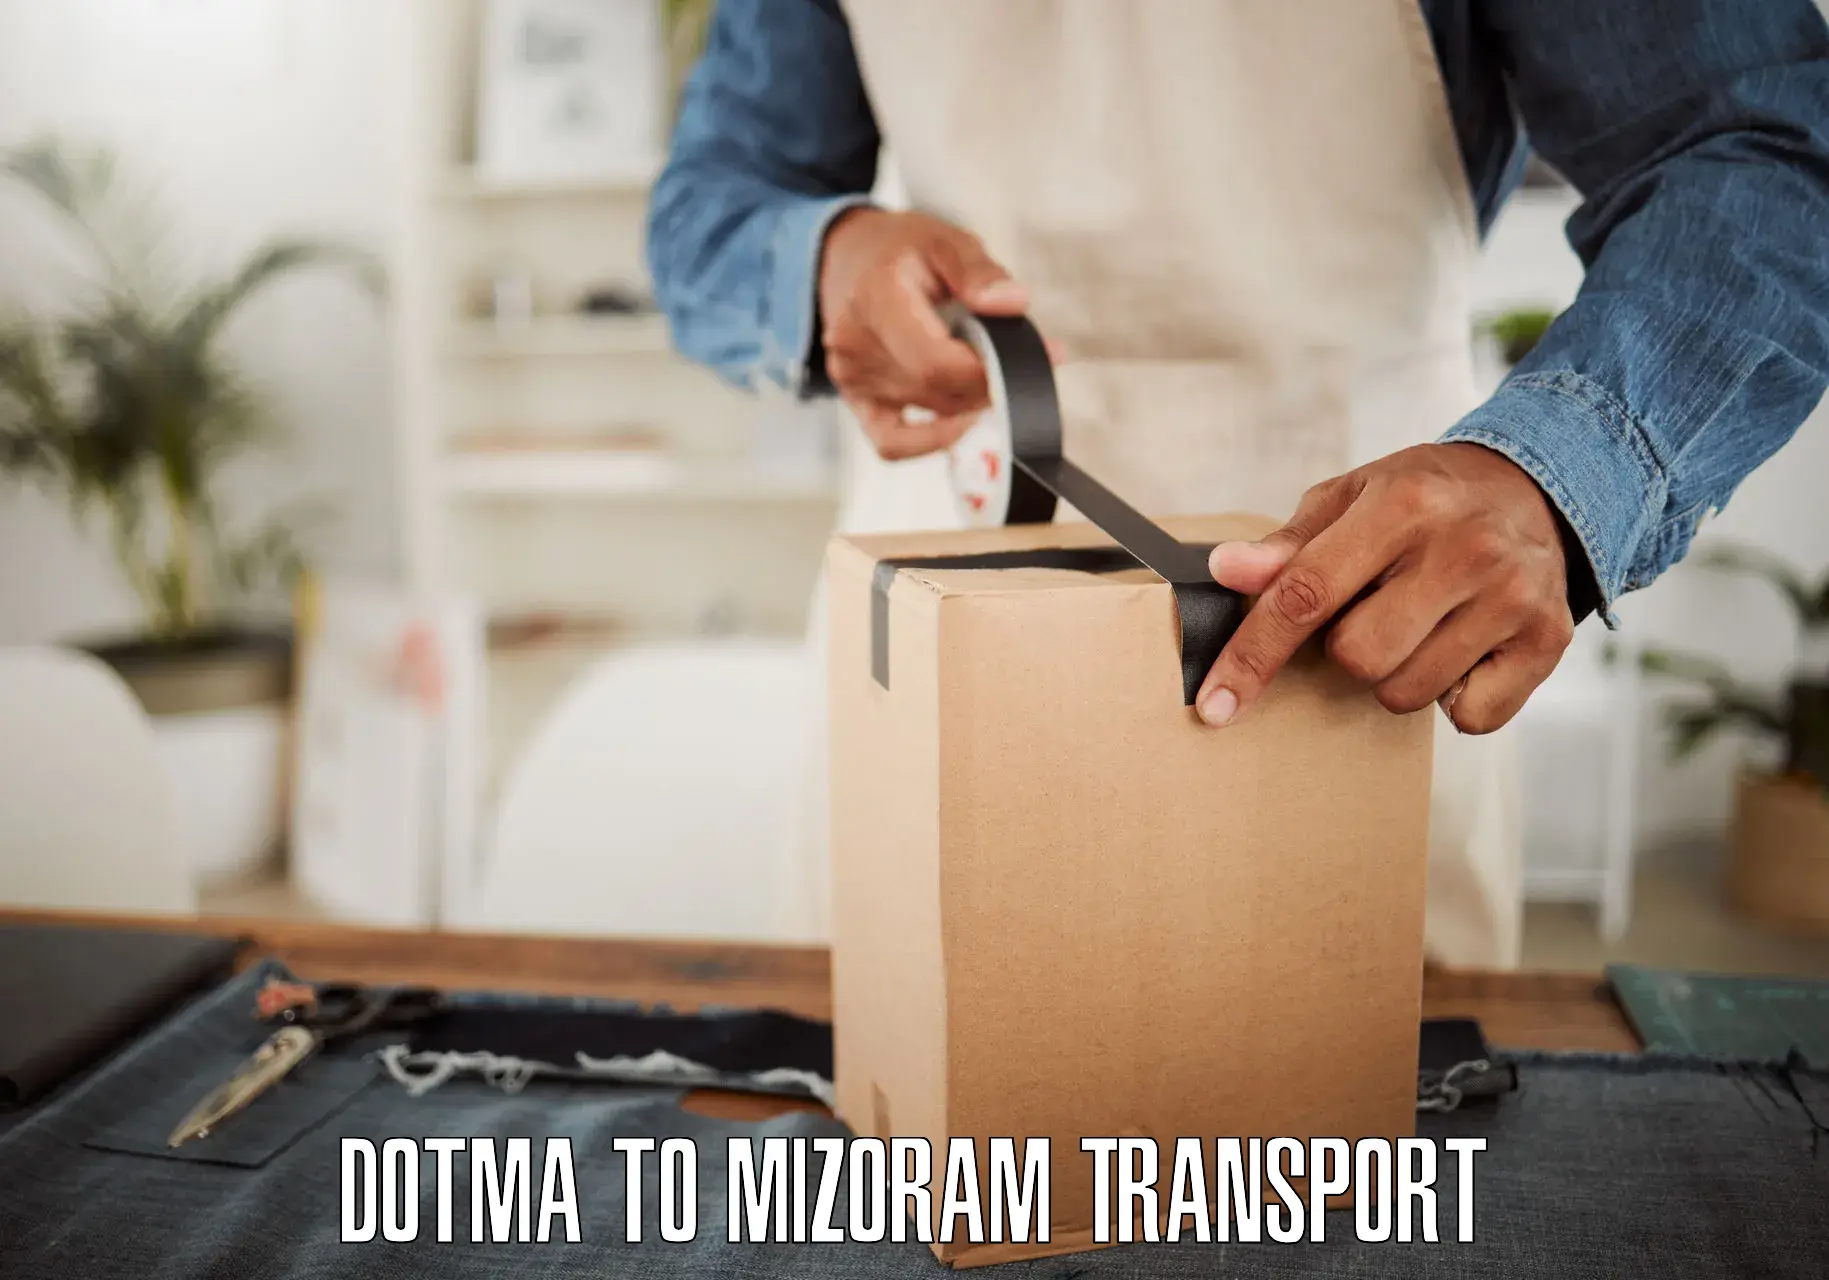 Express transport services Dotma to Darlawn